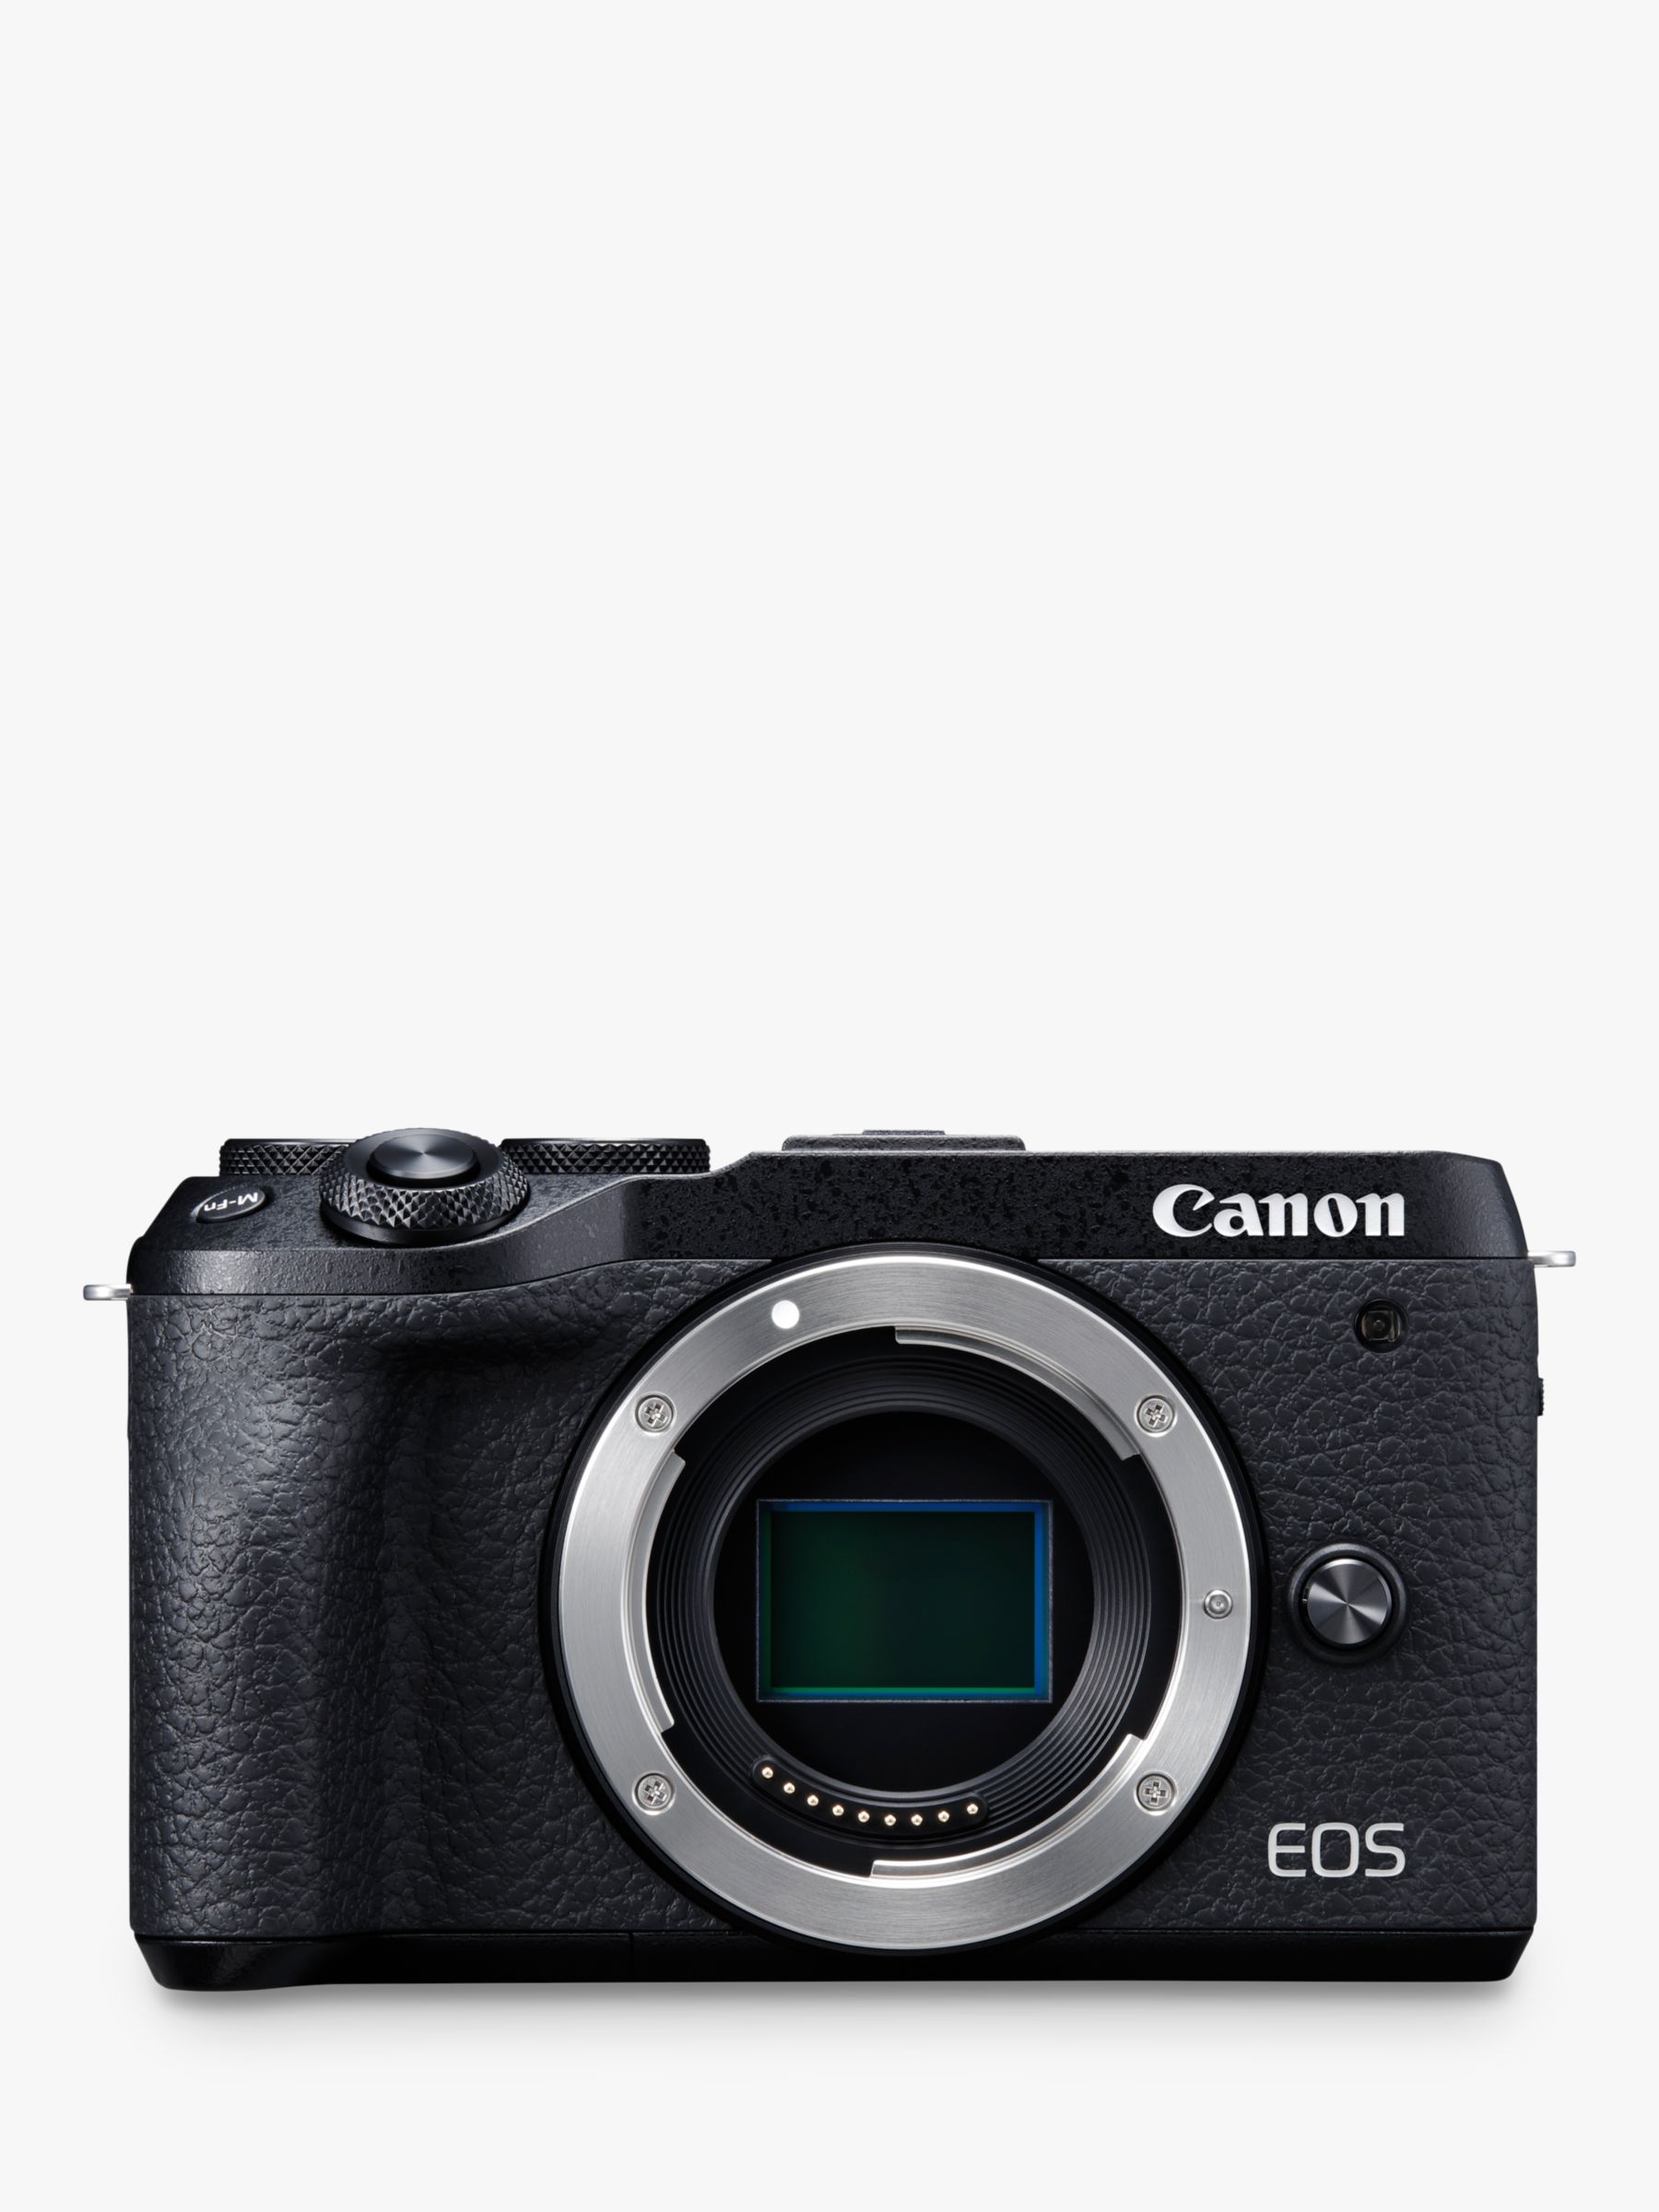 Image of Canon EOS M6 Mark II Compact System Camera 4K Ultra HD 325MP WiFi Bluetooth 3 LCD Tiltable Touch Screen Body Only Black